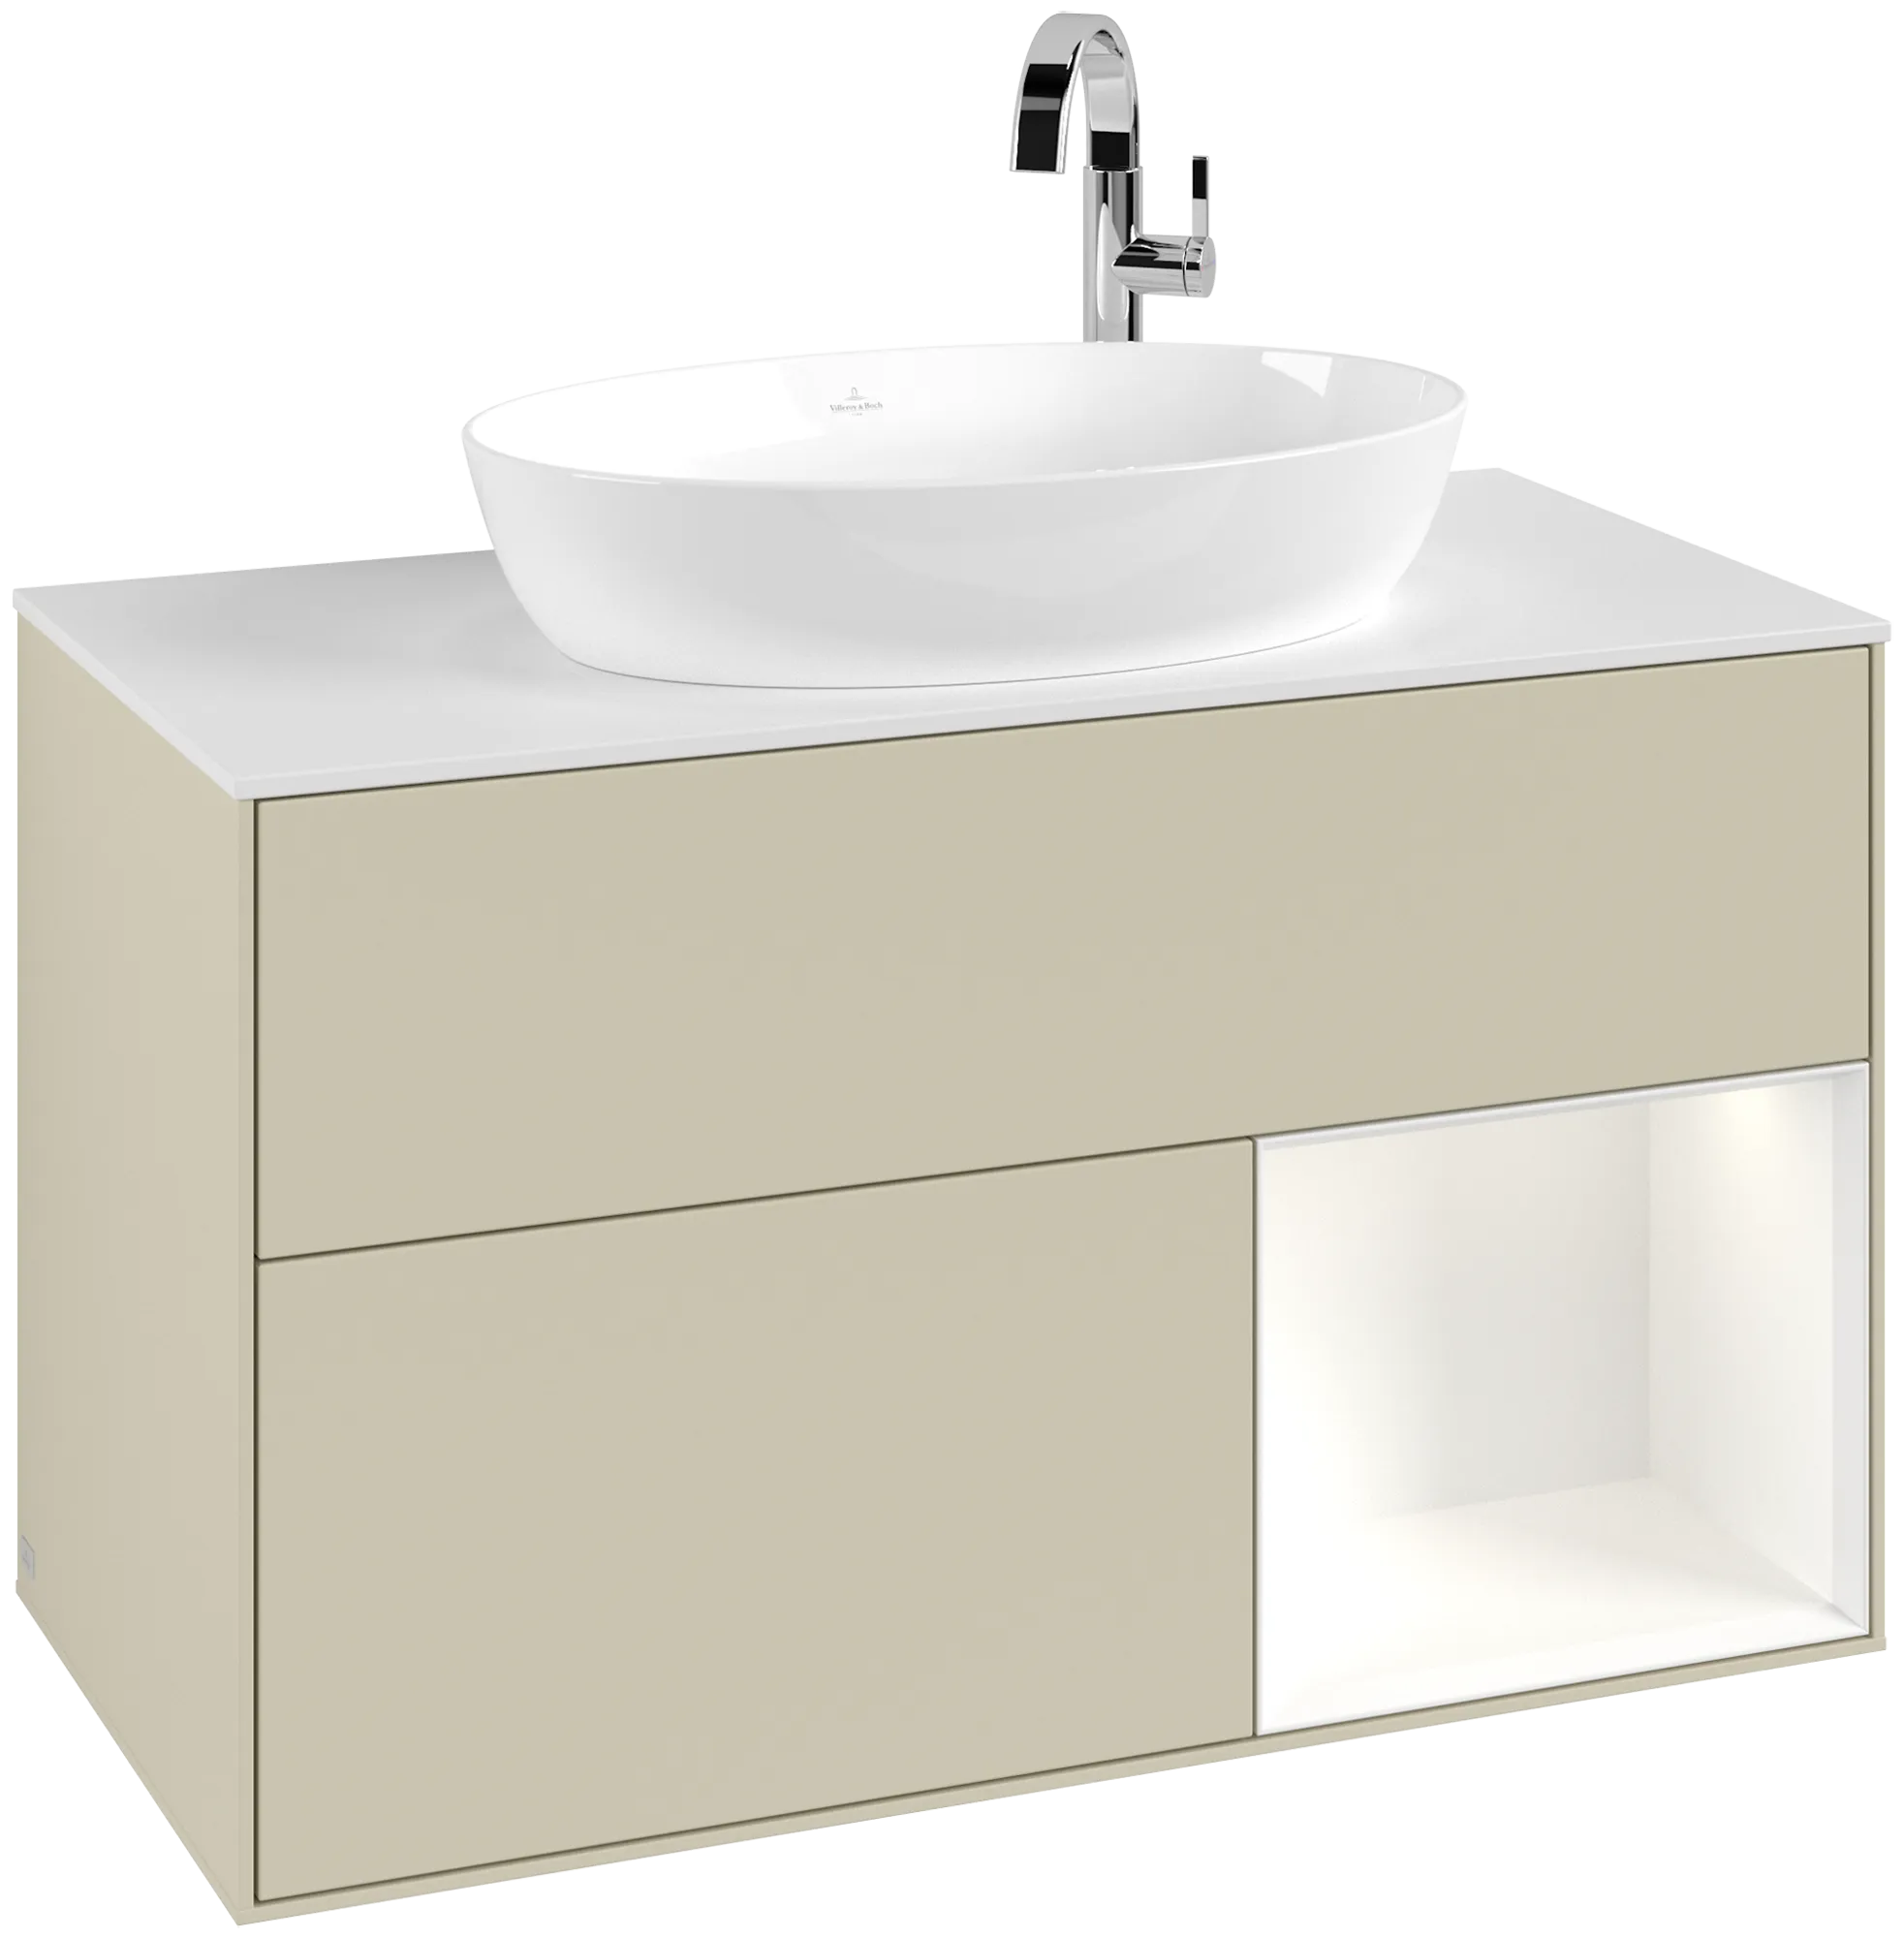 VILLEROY BOCH Finion Vanity unit, with lighting, 2 pull-out compartments, 1000 x 603 x 501 mm, Silk Grey Matt Lacquer / White Matt Lacquer / Glass White Matt #G901MTHJ resmi